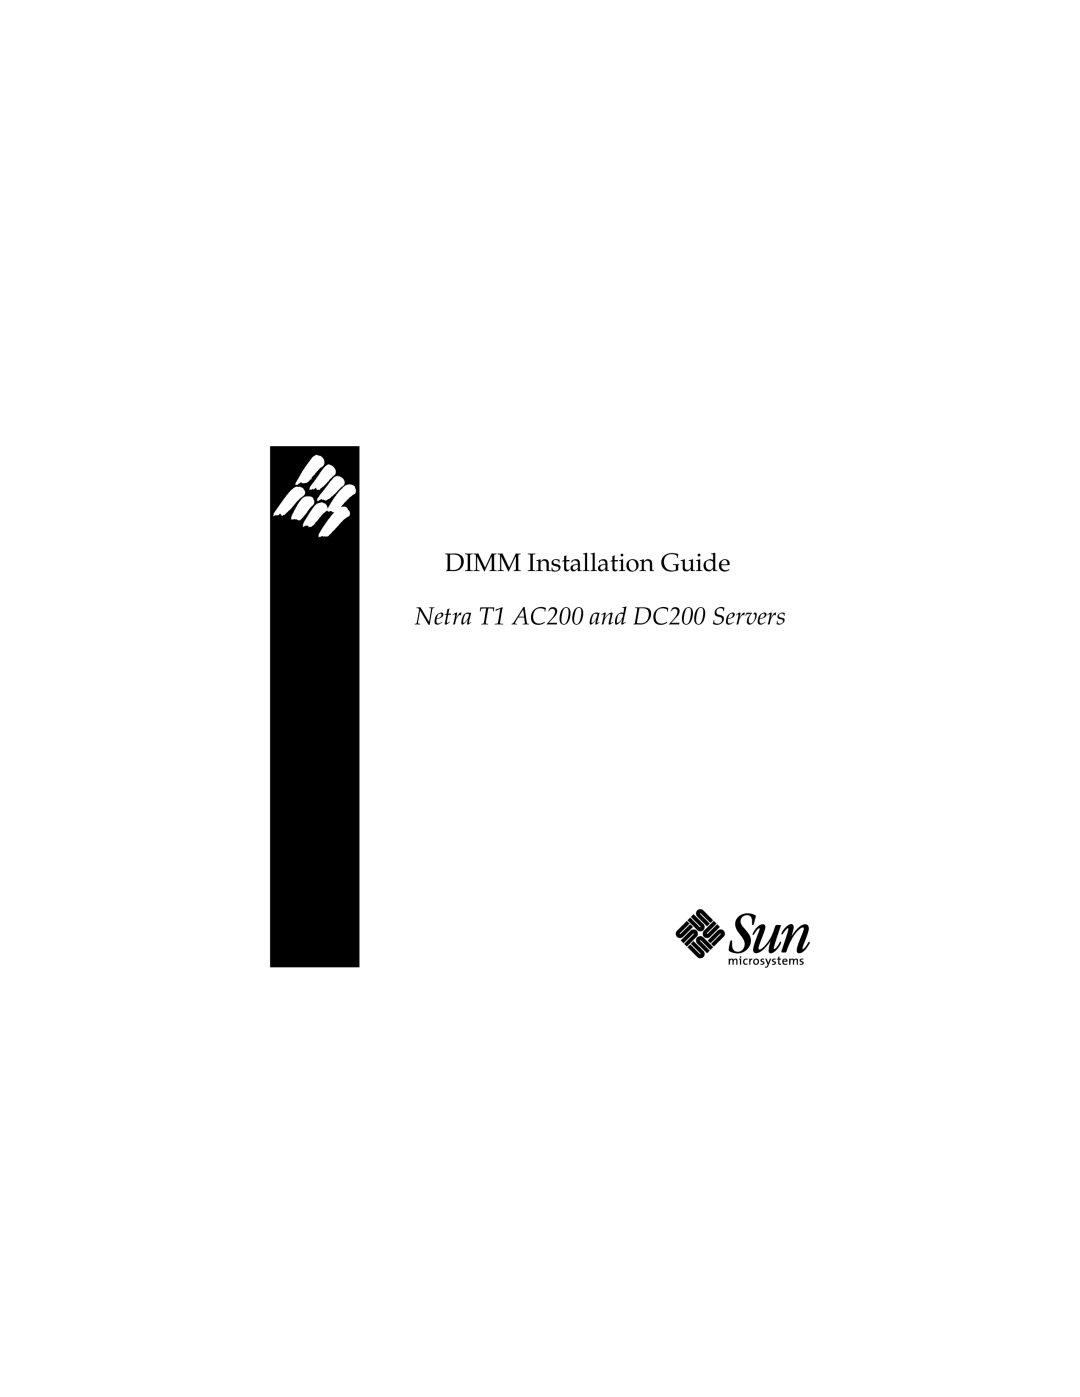 Sun Microsystems manual DIMM Installation Guide, Netra T1 AC200 and DC200 Servers 